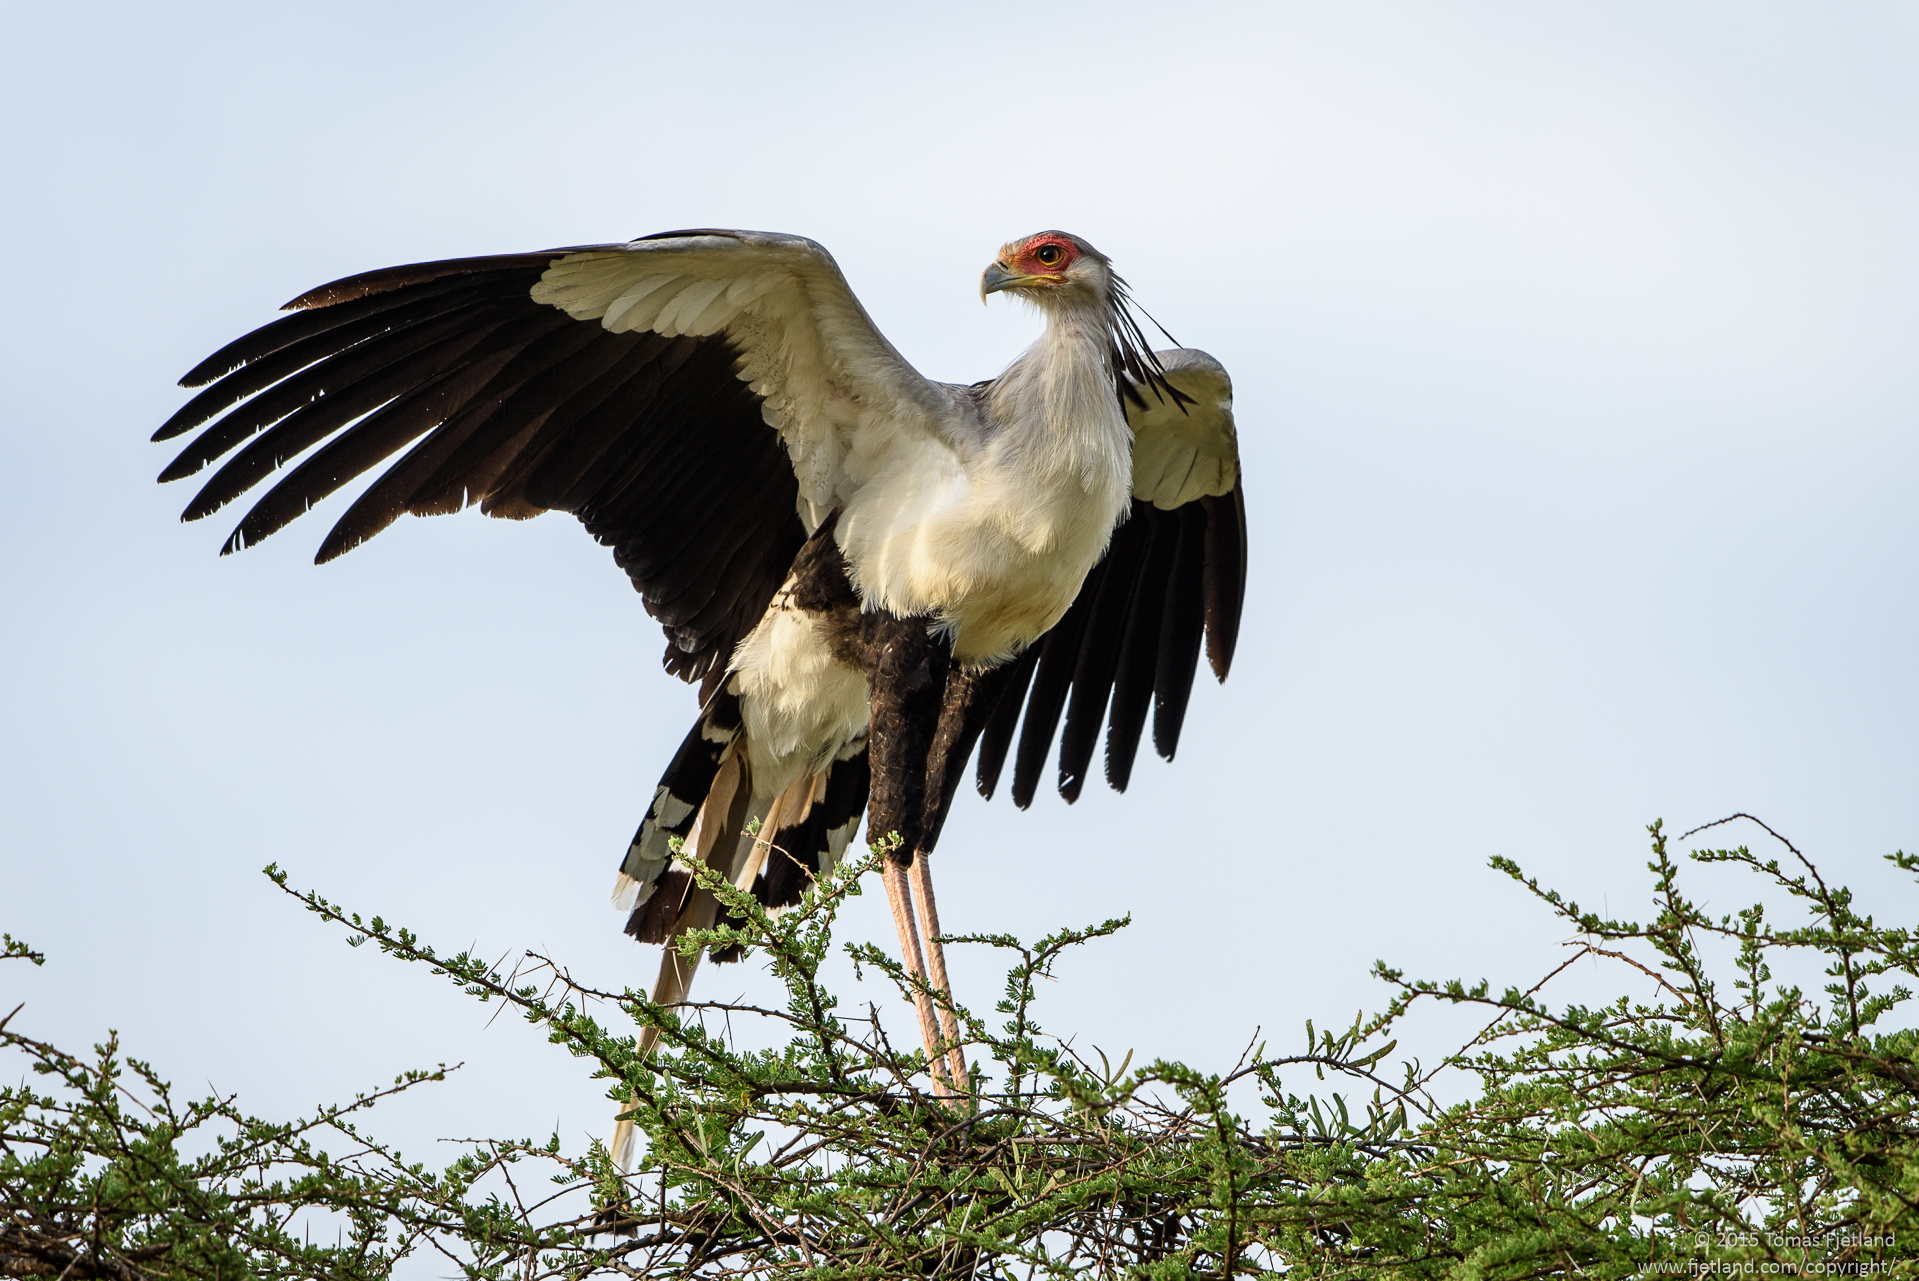 The magnificent Secretary bird stretching its wings before takeoff